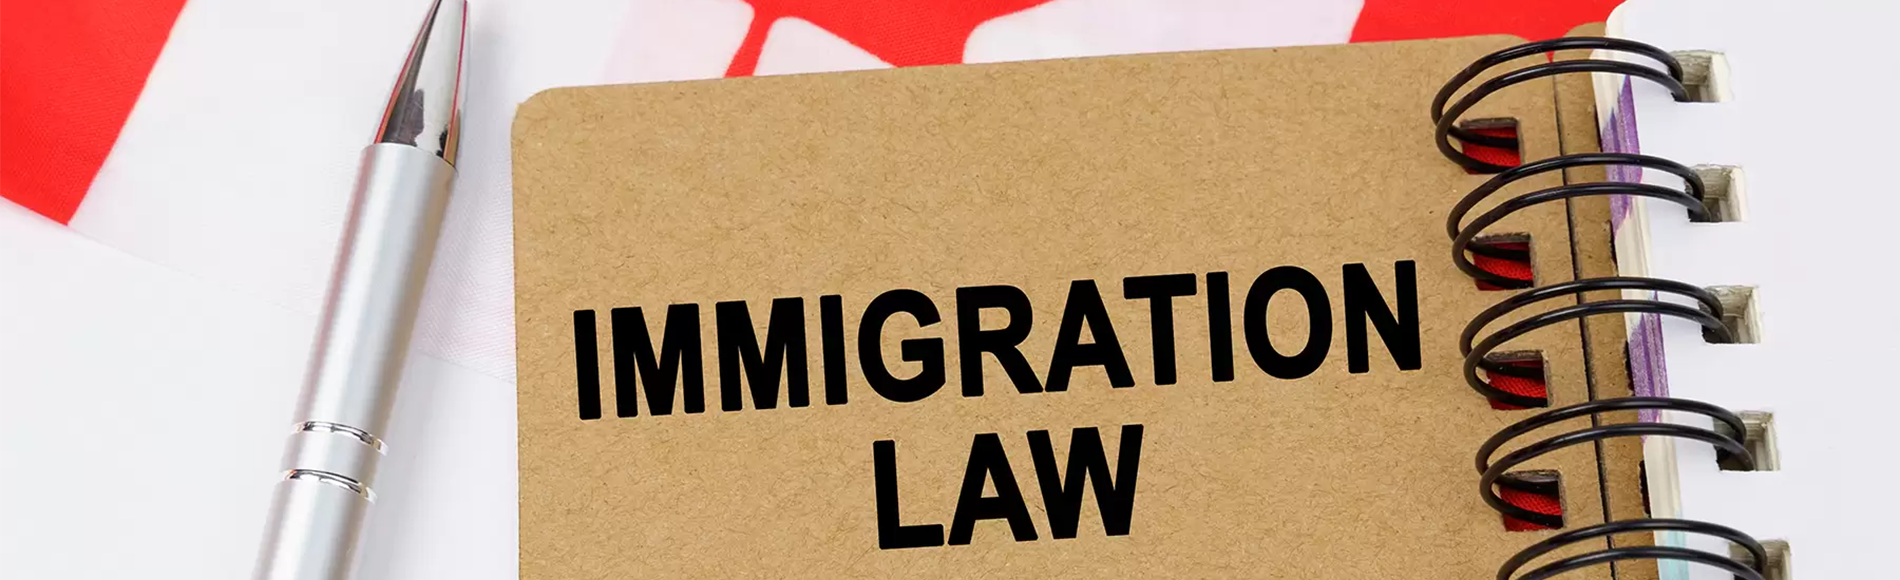 Immigration lawyer vs an immigration consultant to immigrate to Canada